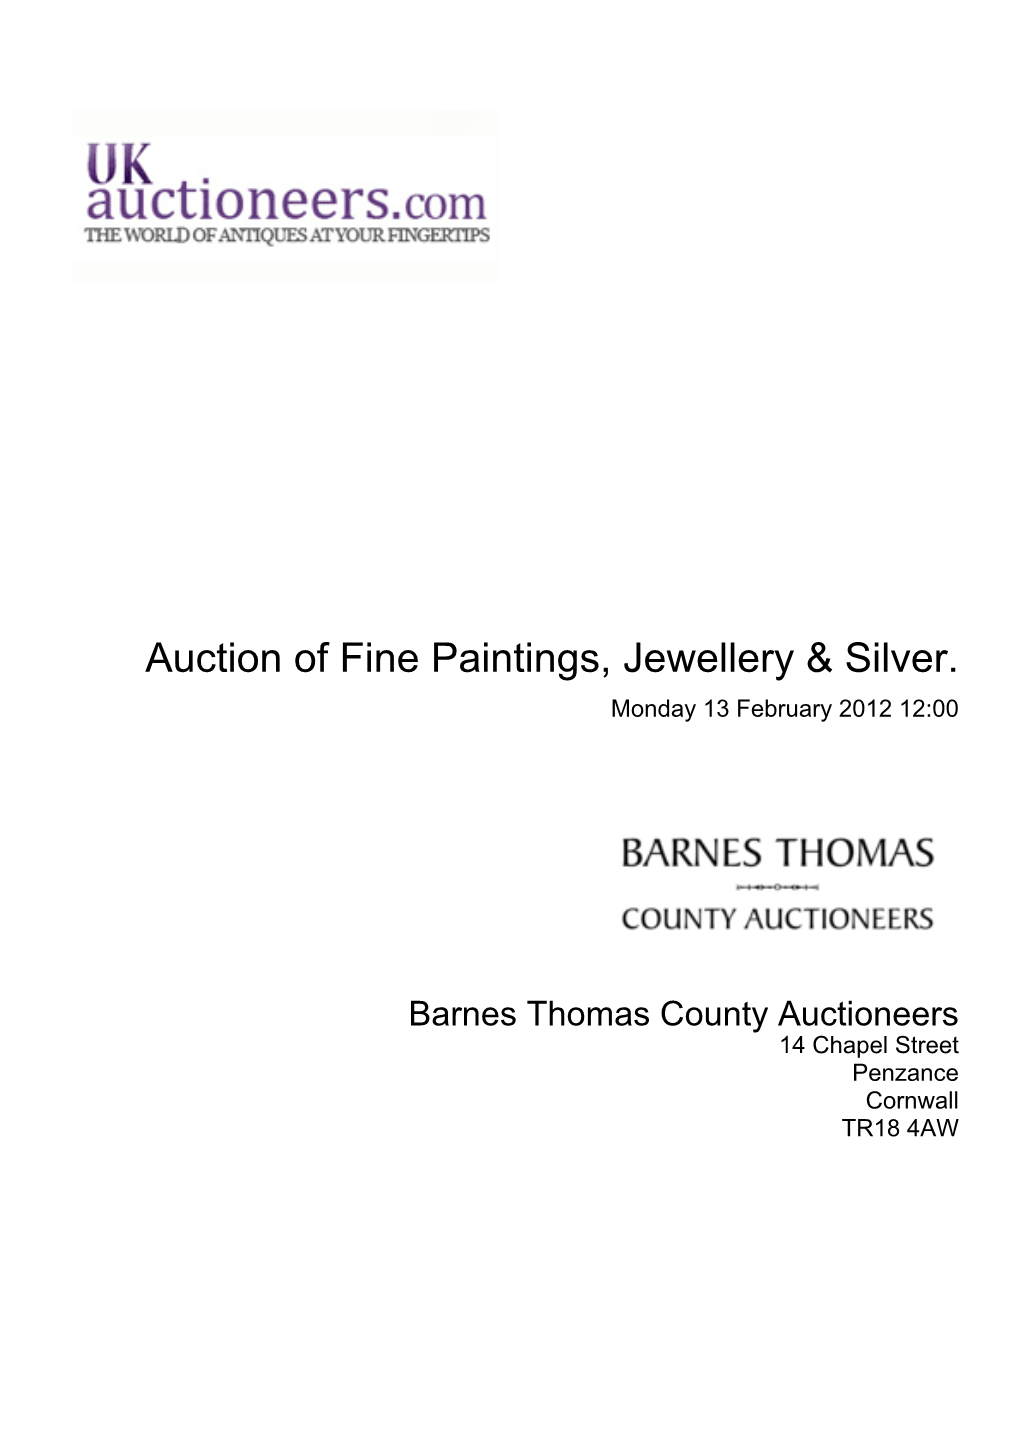 Auction of Fine Paintings, Jewellery & Silver